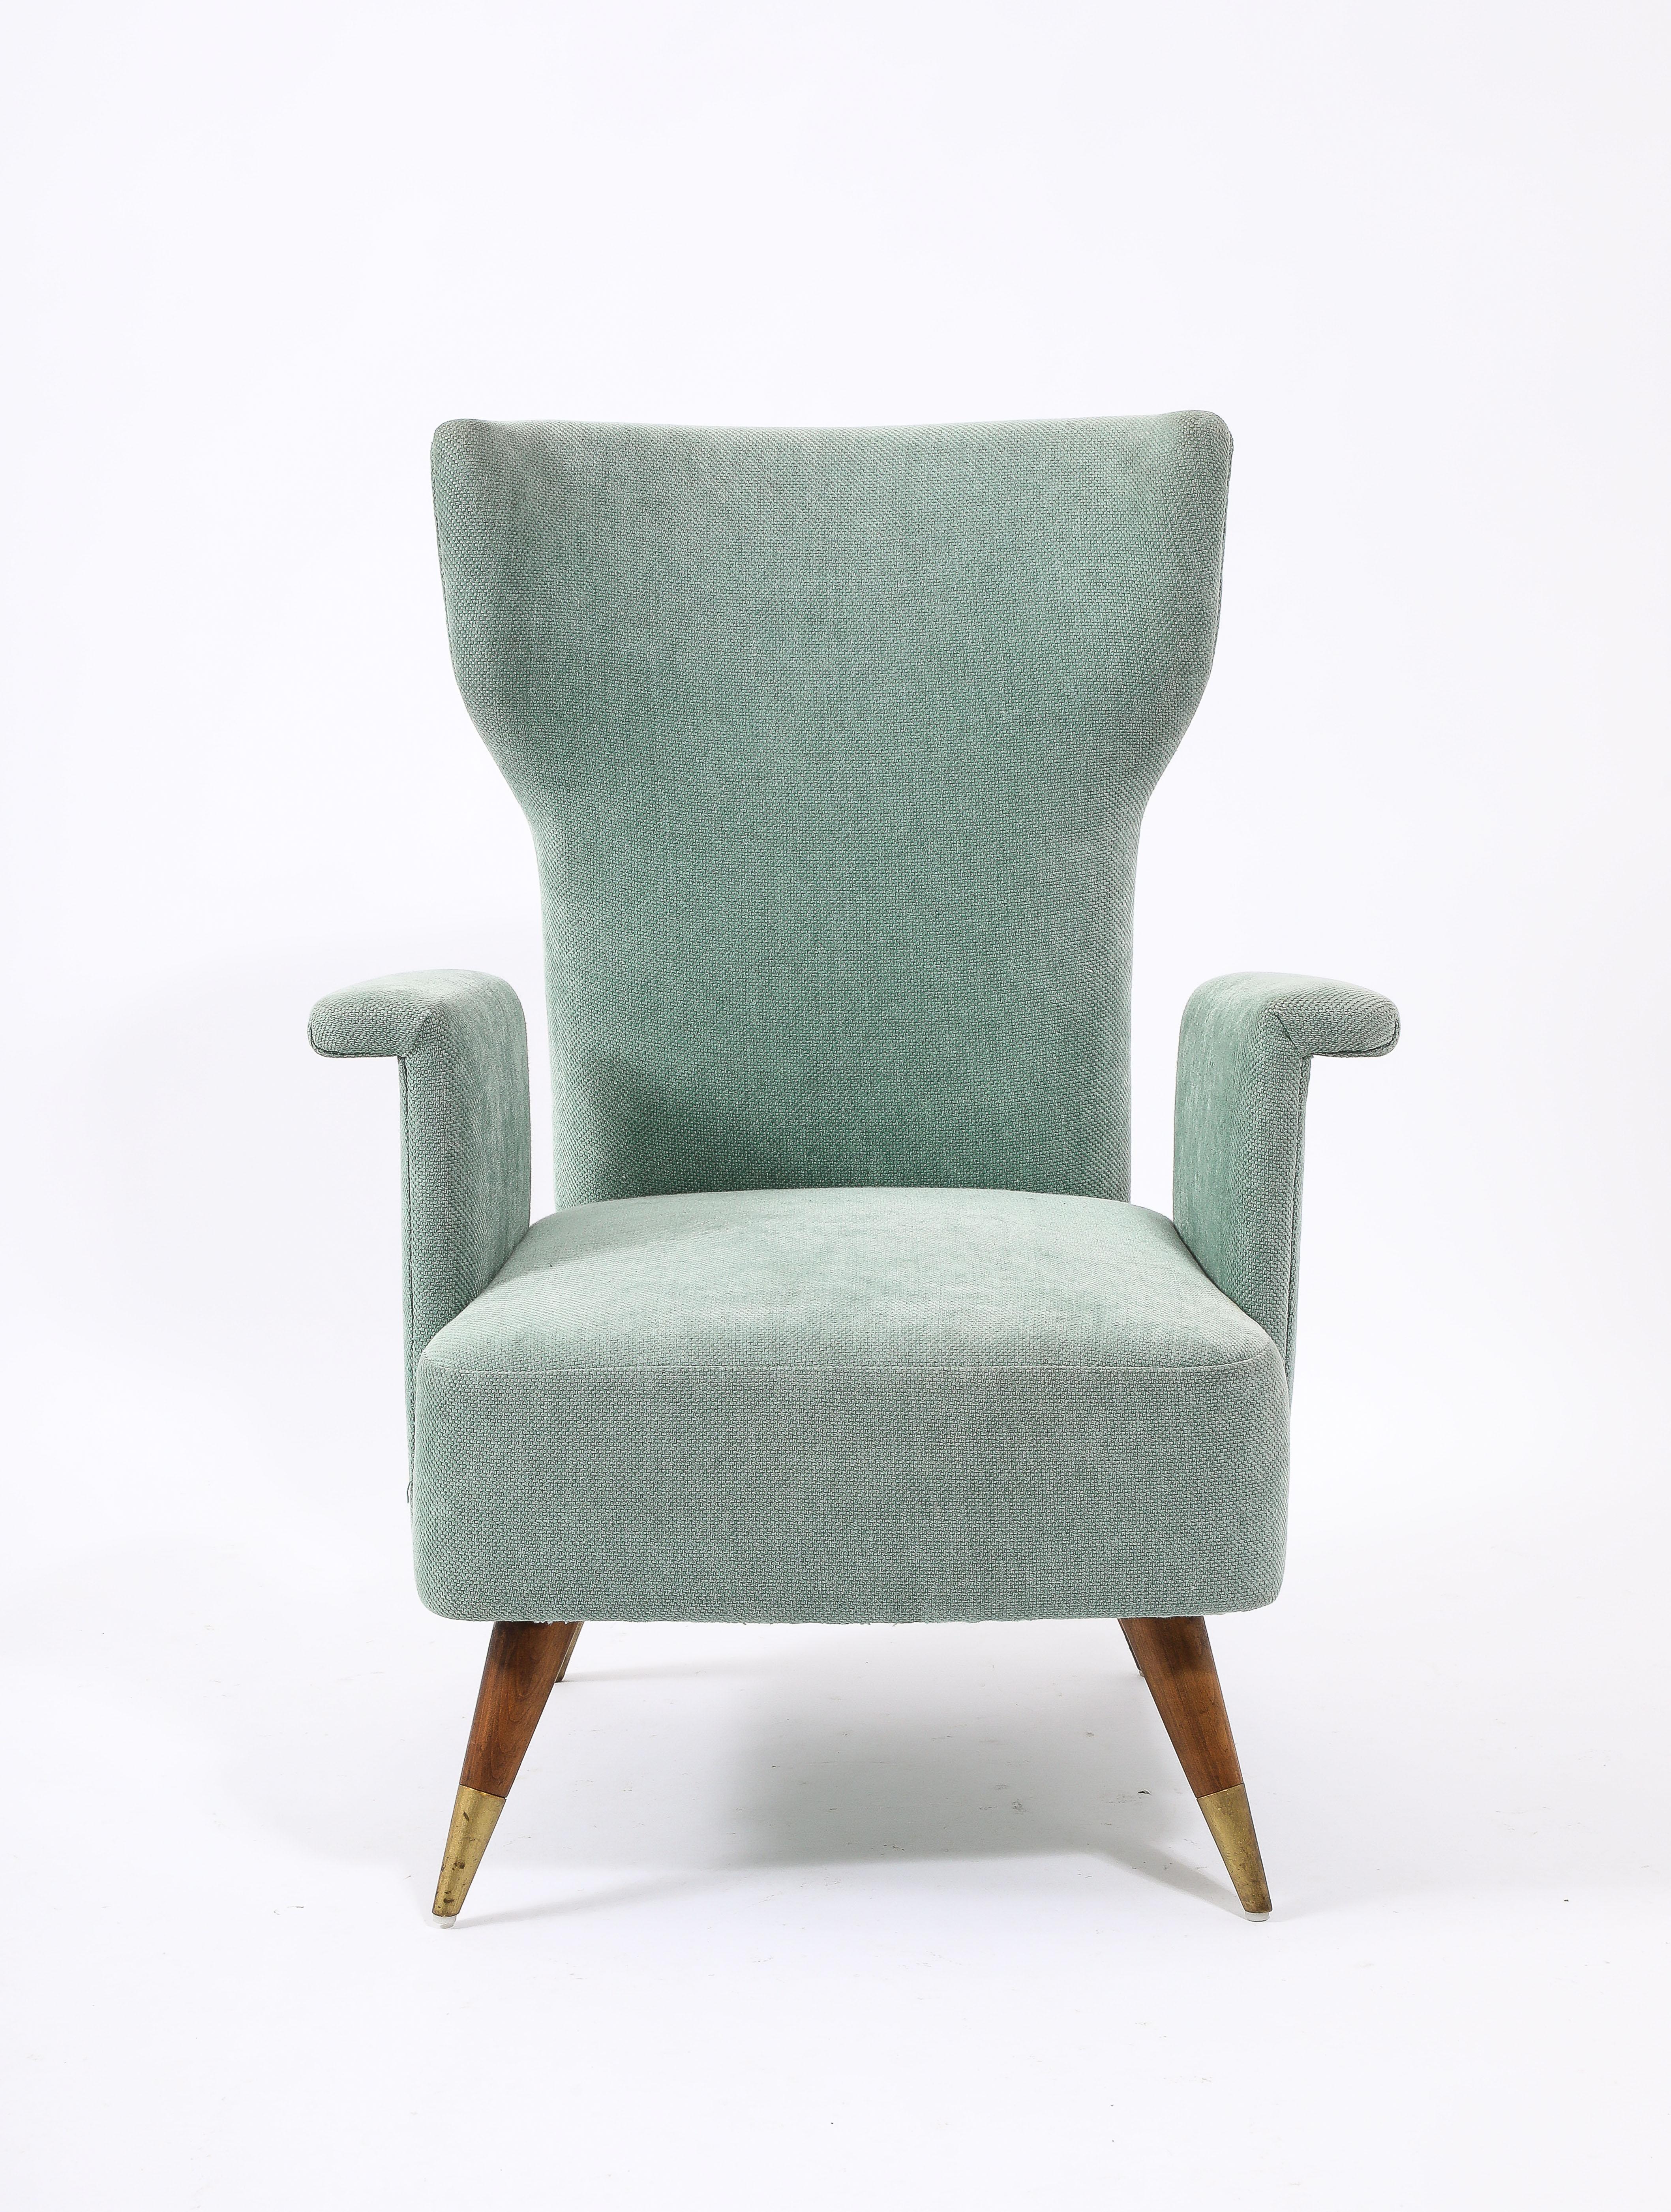 Pale Blue Tall Italian Wingchairs, Italy 1950's For Sale 3